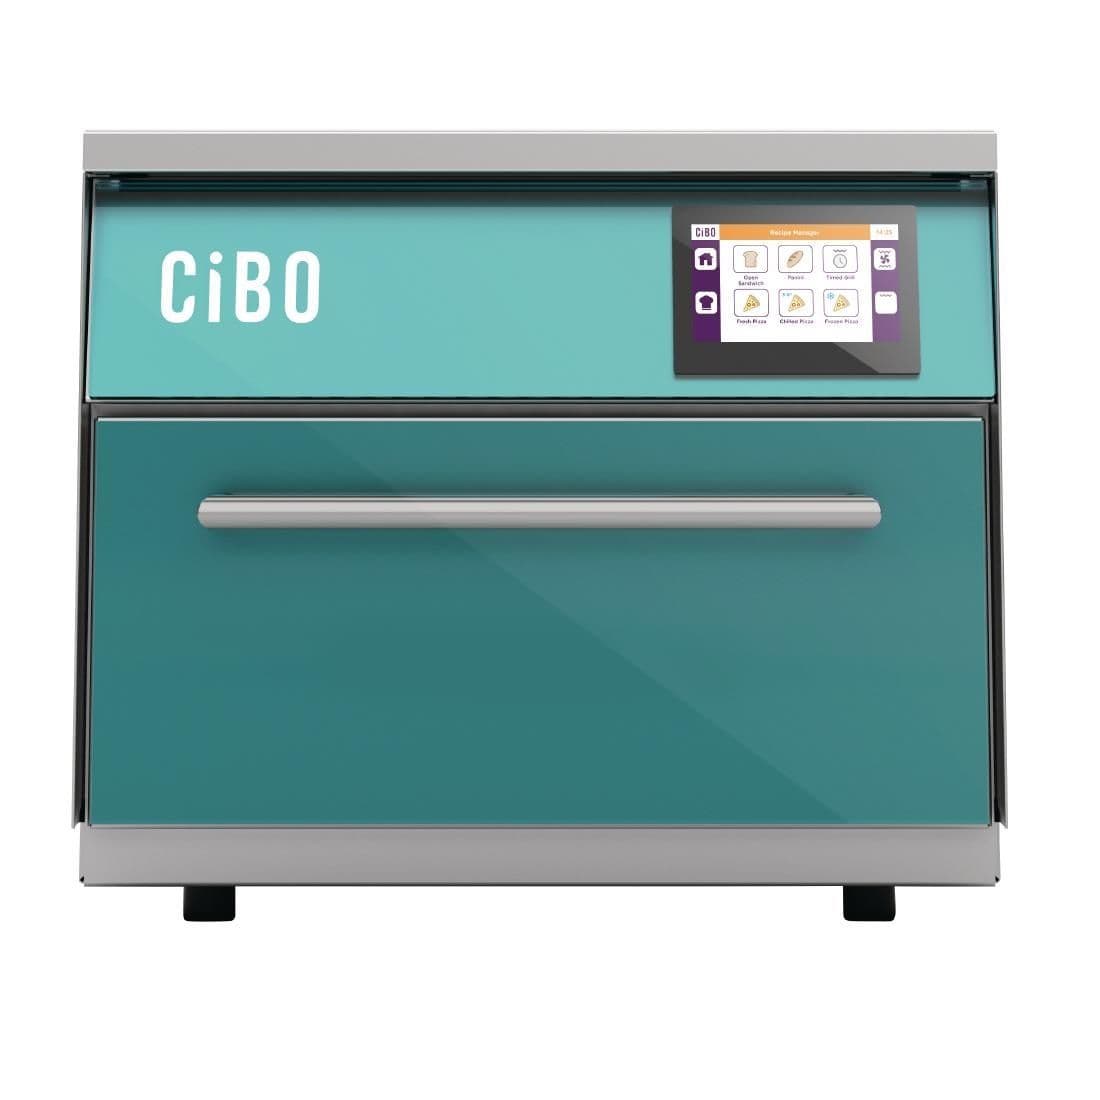 CY512 Lincat Cibo High Speed Oven Teal CIBO/T JD Catering Equipment Solutions Ltd